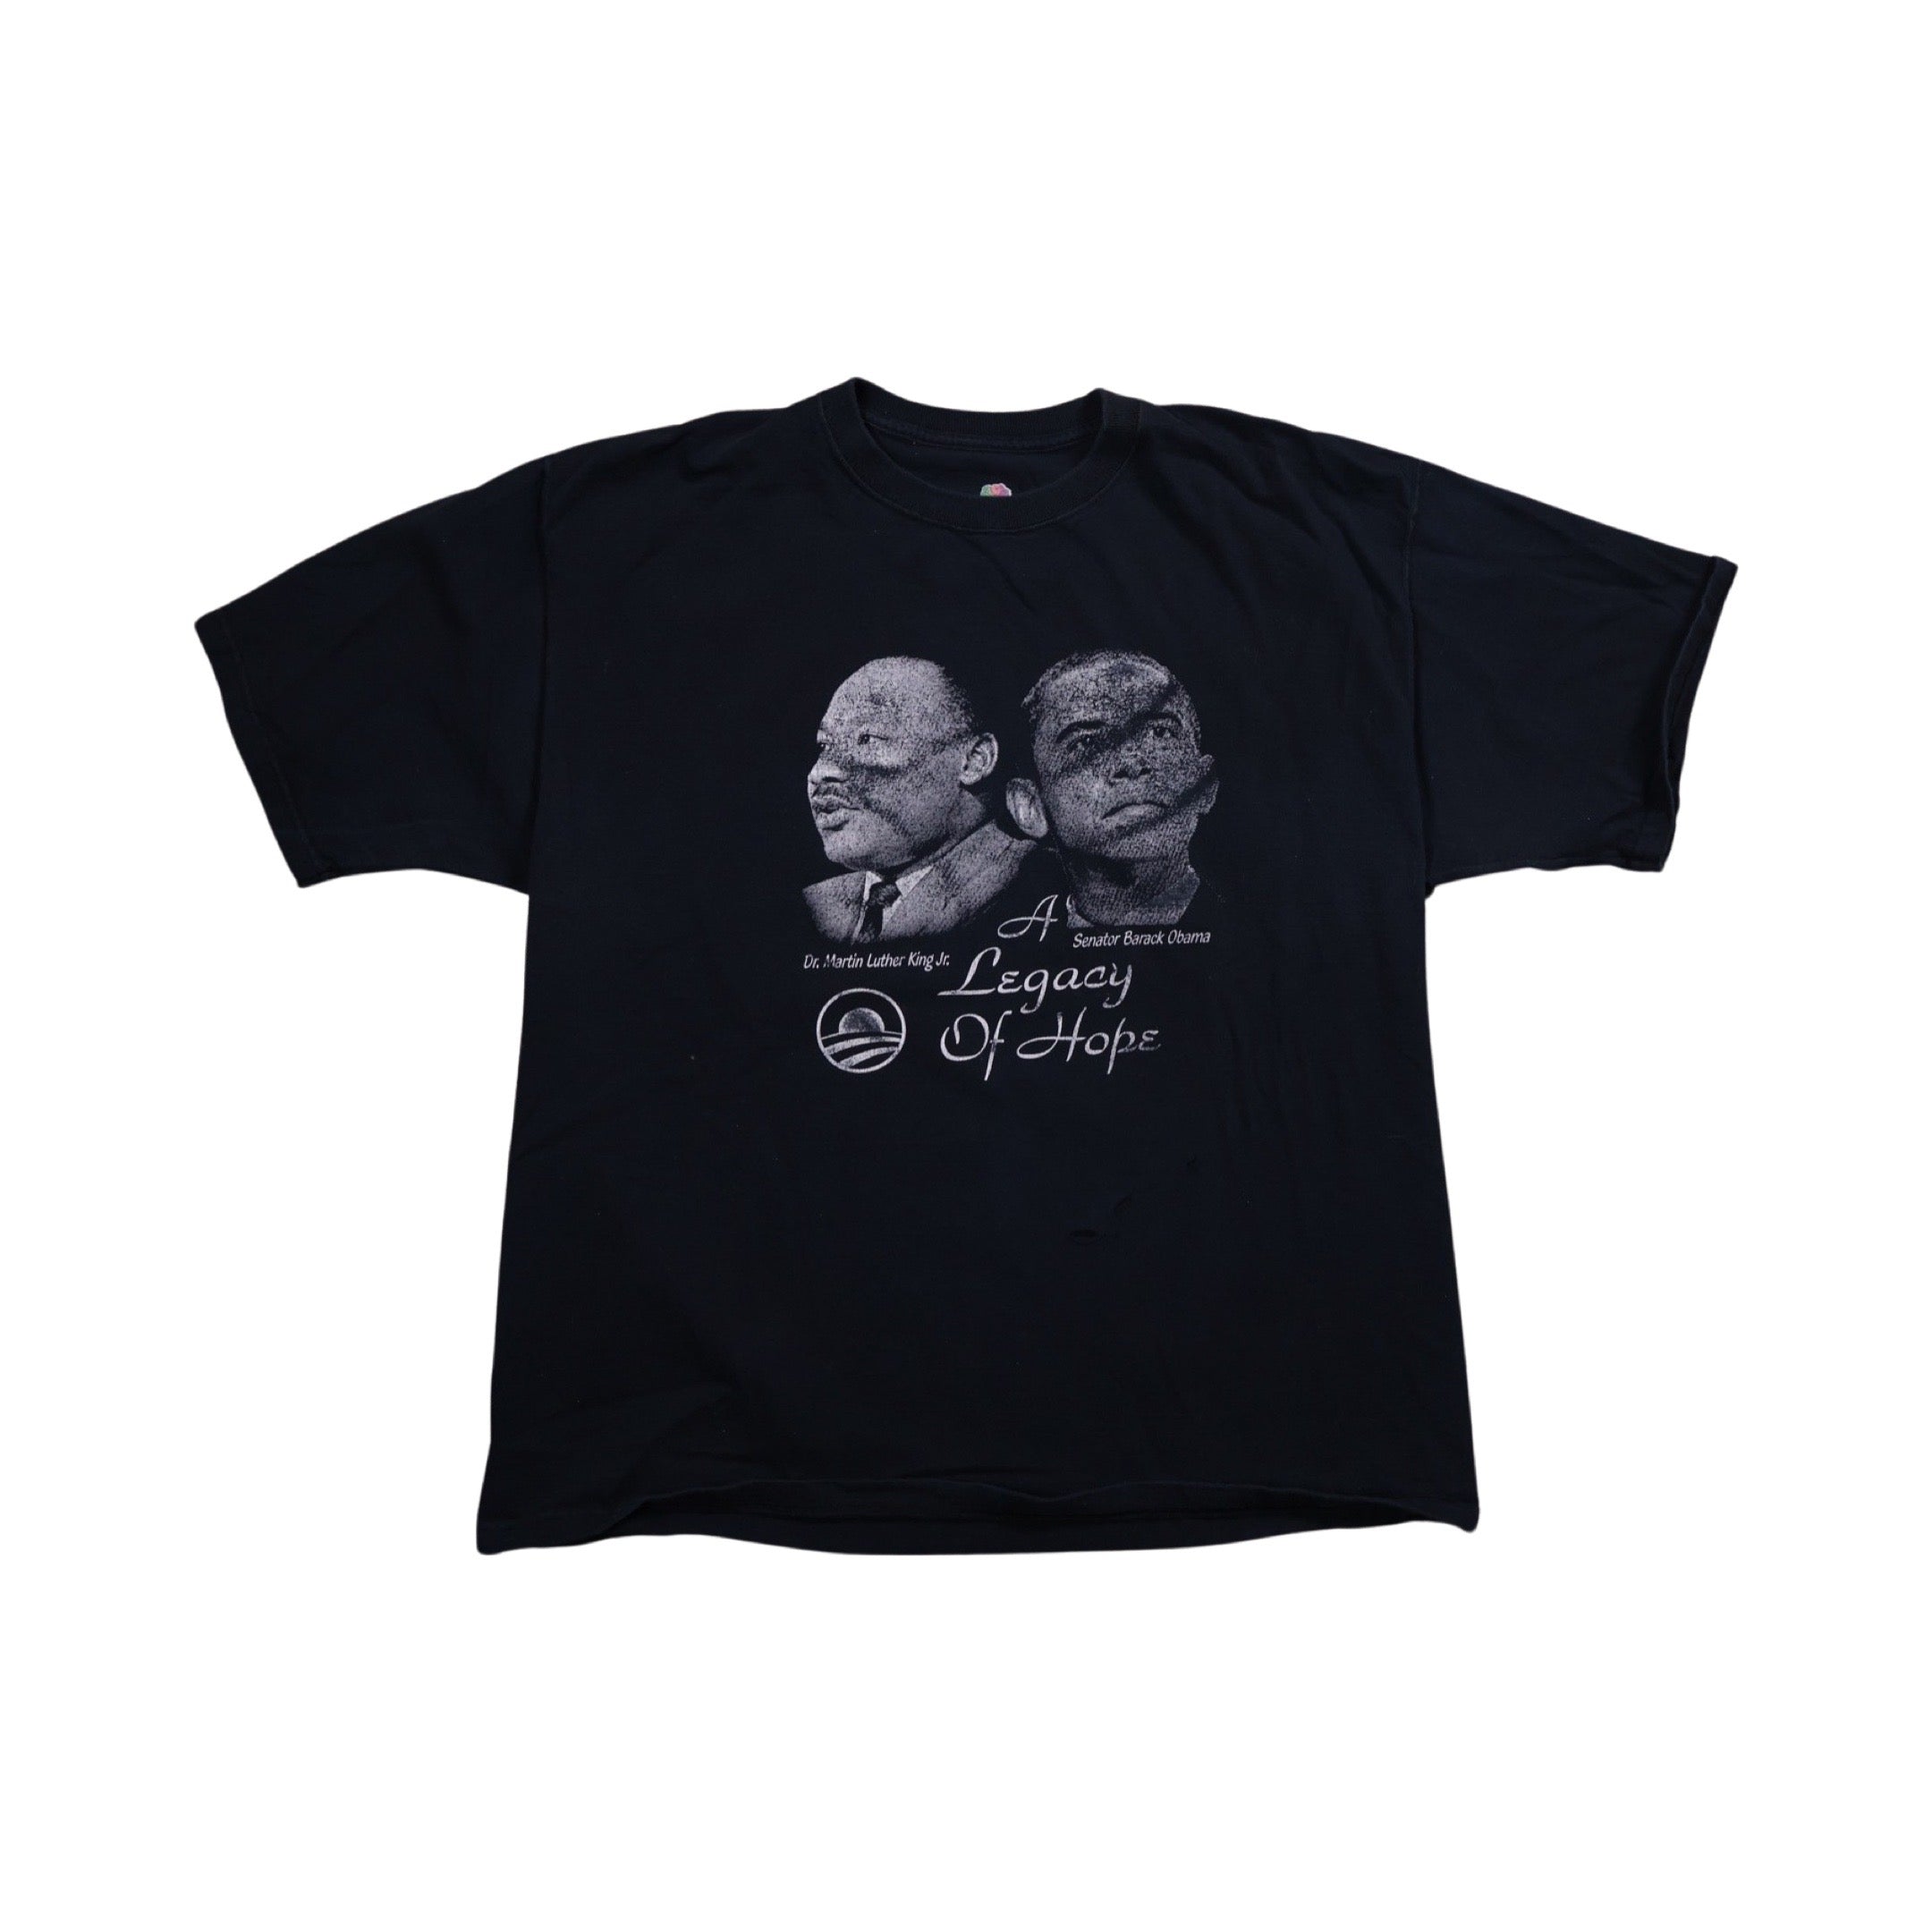 MLK and Obama 00s T-Shirt (XL)